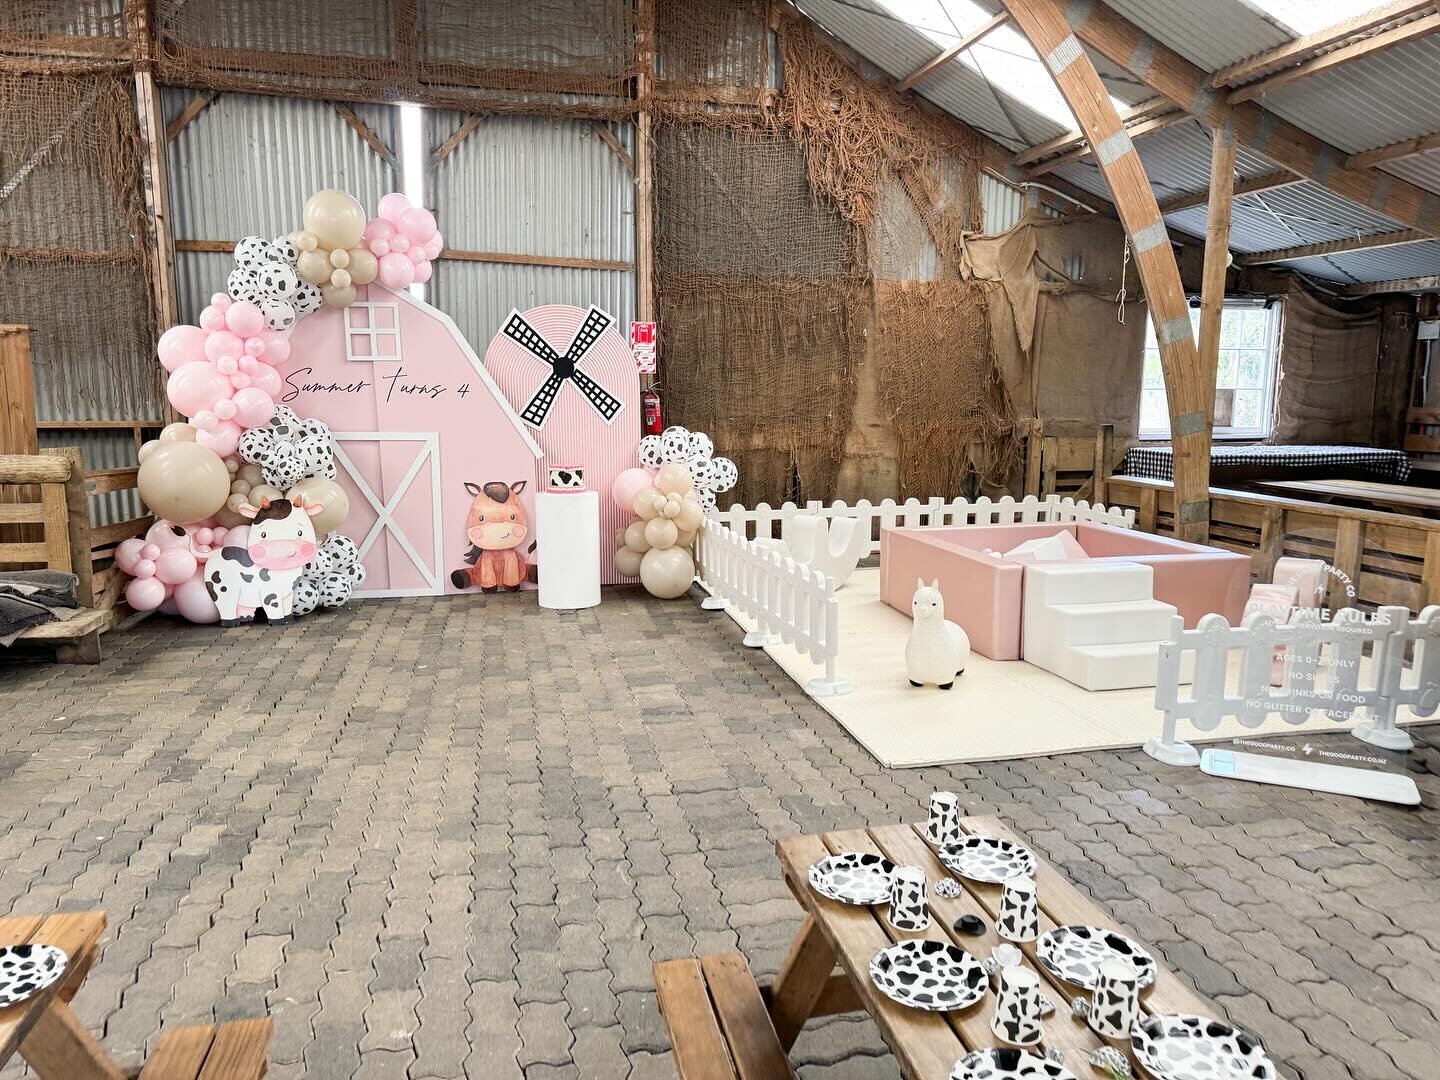 Barnyard theme party for the cutest animal lover 
🐷🐑🐮

Featuring our new barnyard prop in pink 😍

Setting up in a barn can be a little underwhelming but add some gorgeous themed elements, pops of colour and @milliecreative.nz (ofcourse 😅) and yo